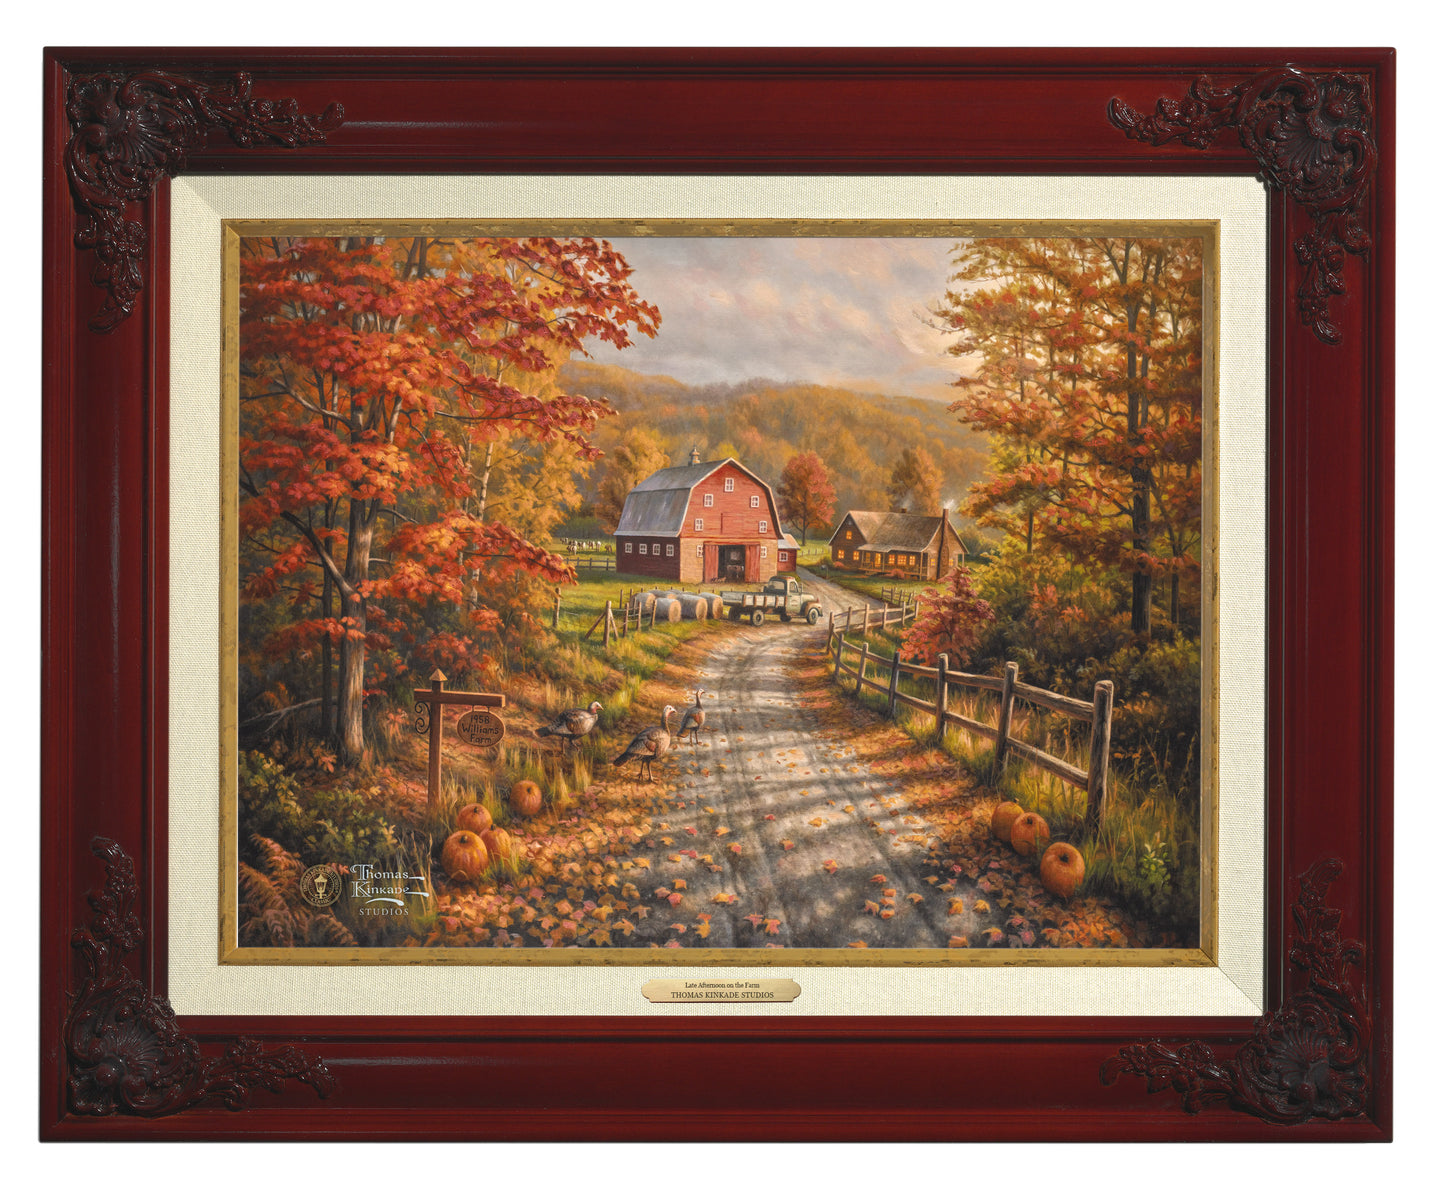 161459_CLF Late Afternoon on the Farm 12X16 Classic - Brandy.jpg